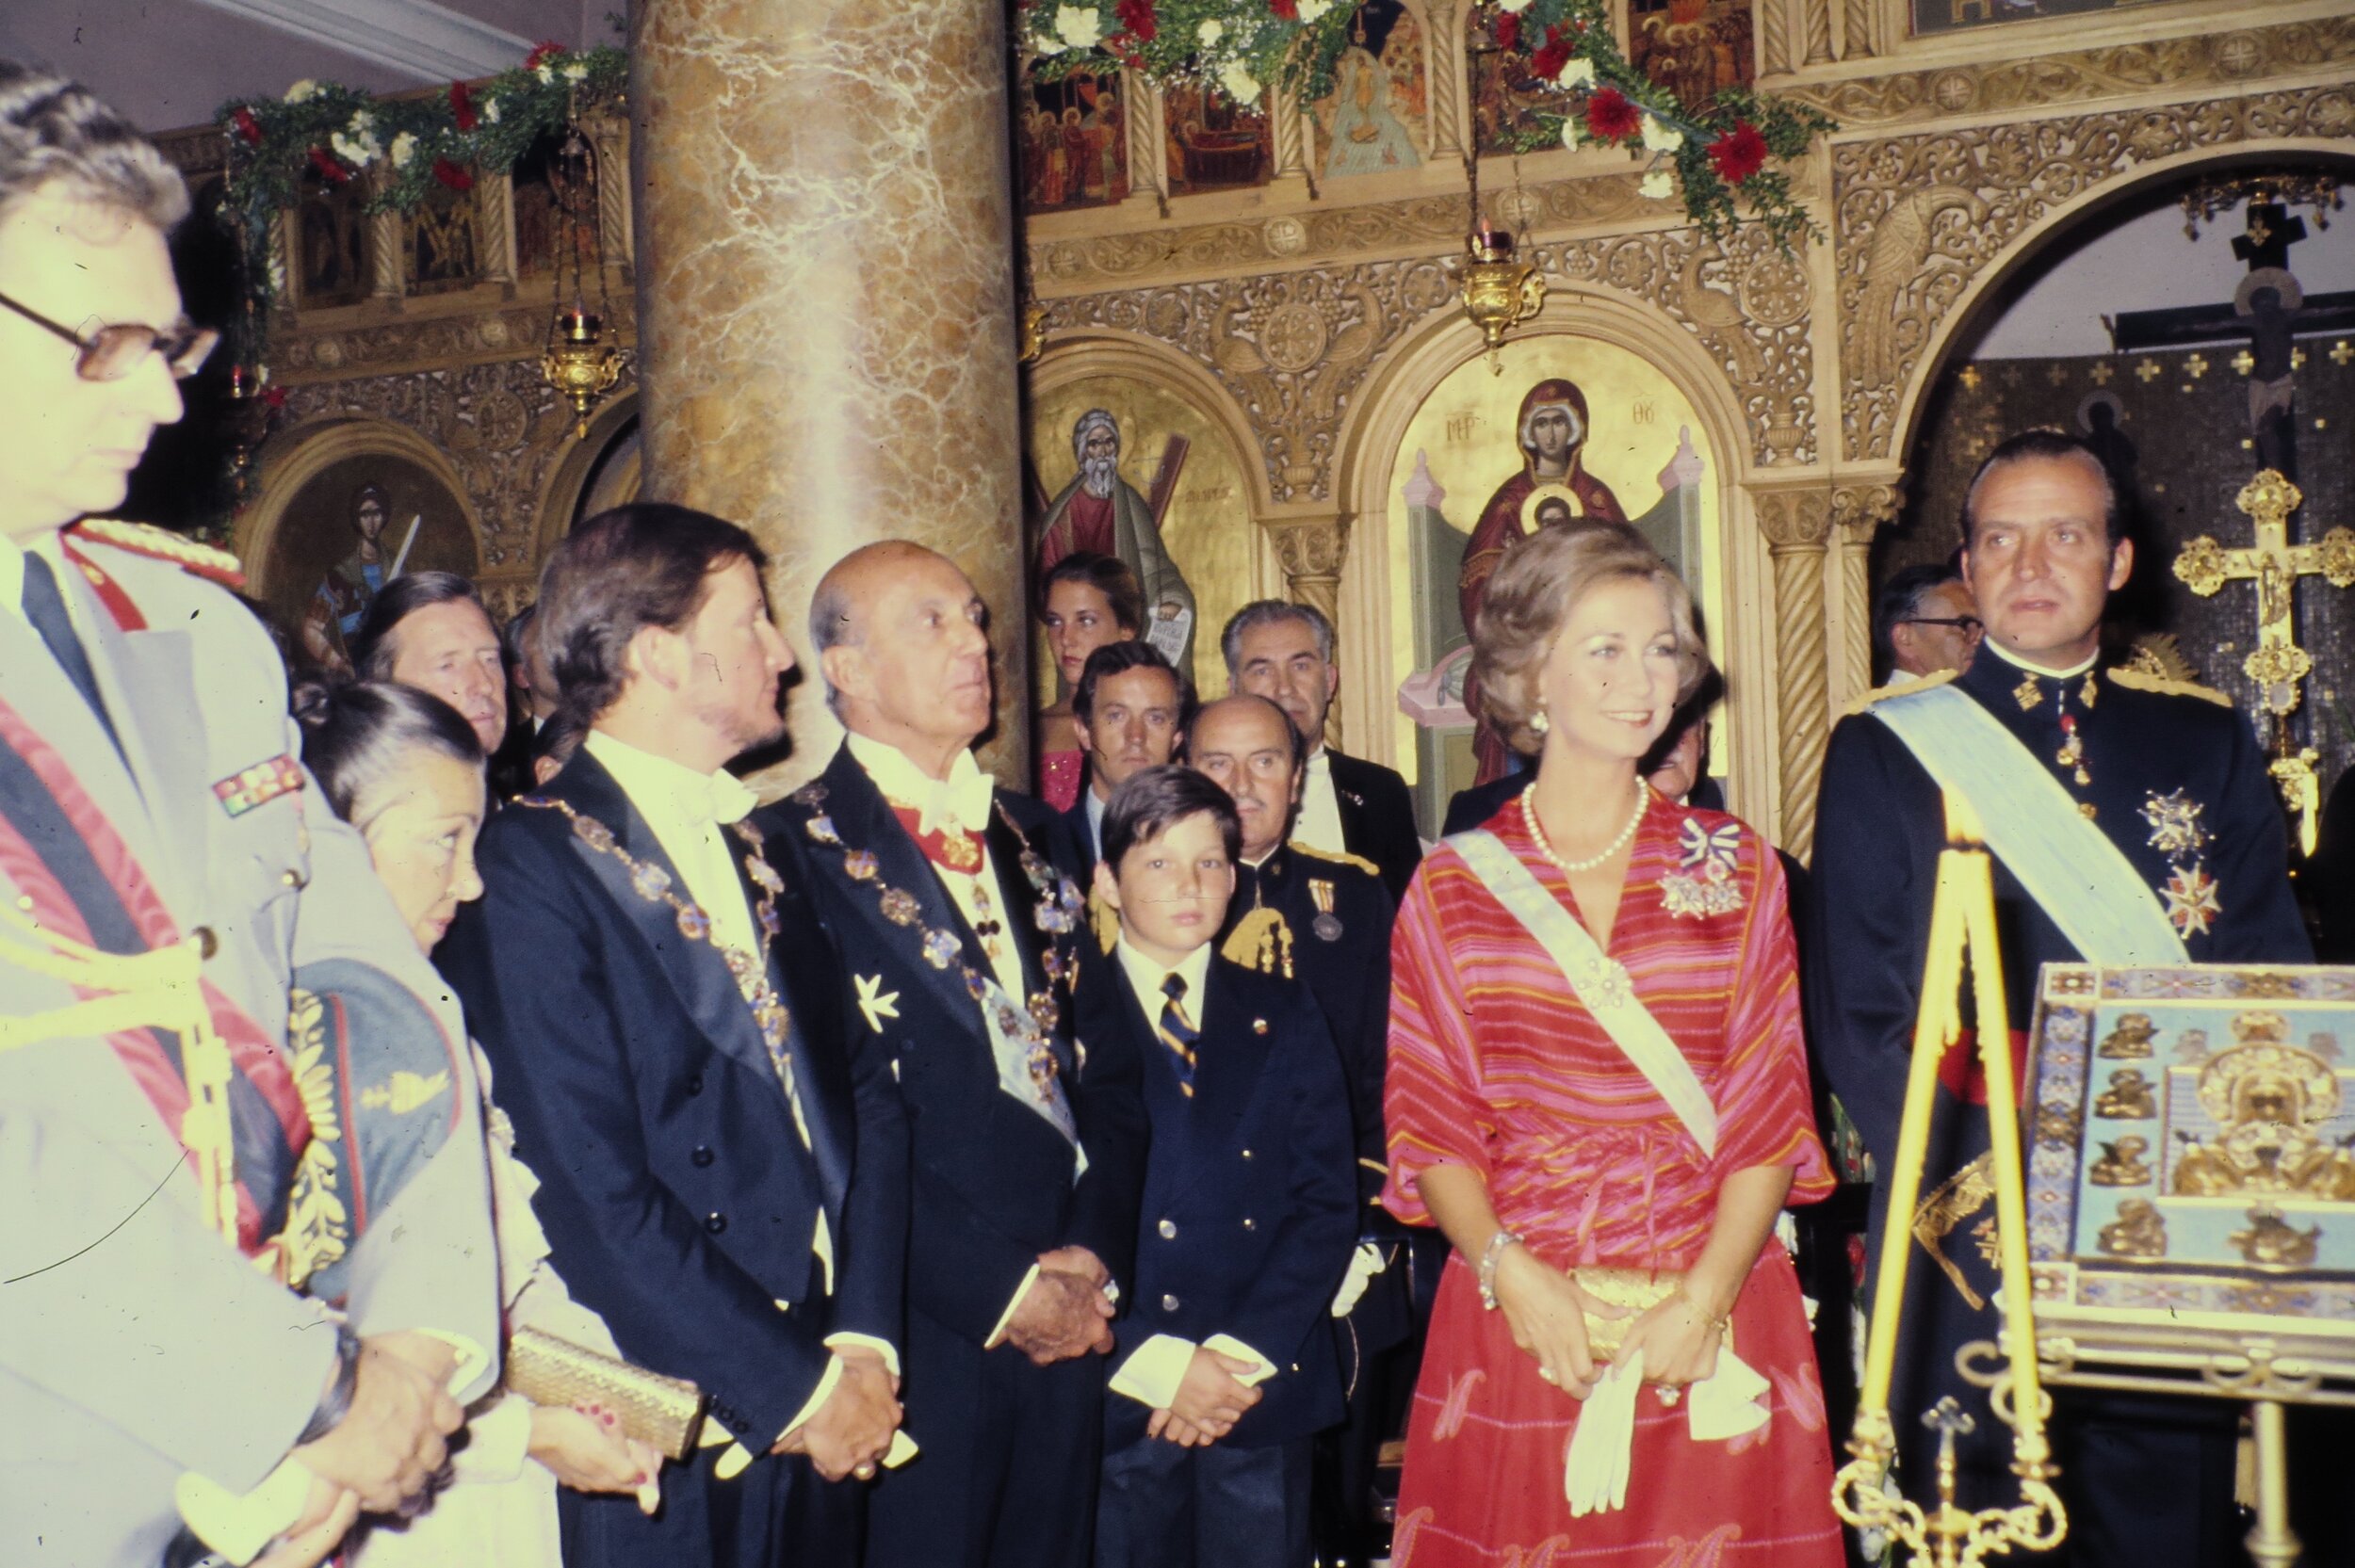 T.M. The King and Queen of Spain with T.M. the King and Queen of Bulgaria at the Wedding of H.I.H. Grand Duchess Maria Wladimirovna of Russia to Prince Franz Wilhelm of Prussia. 